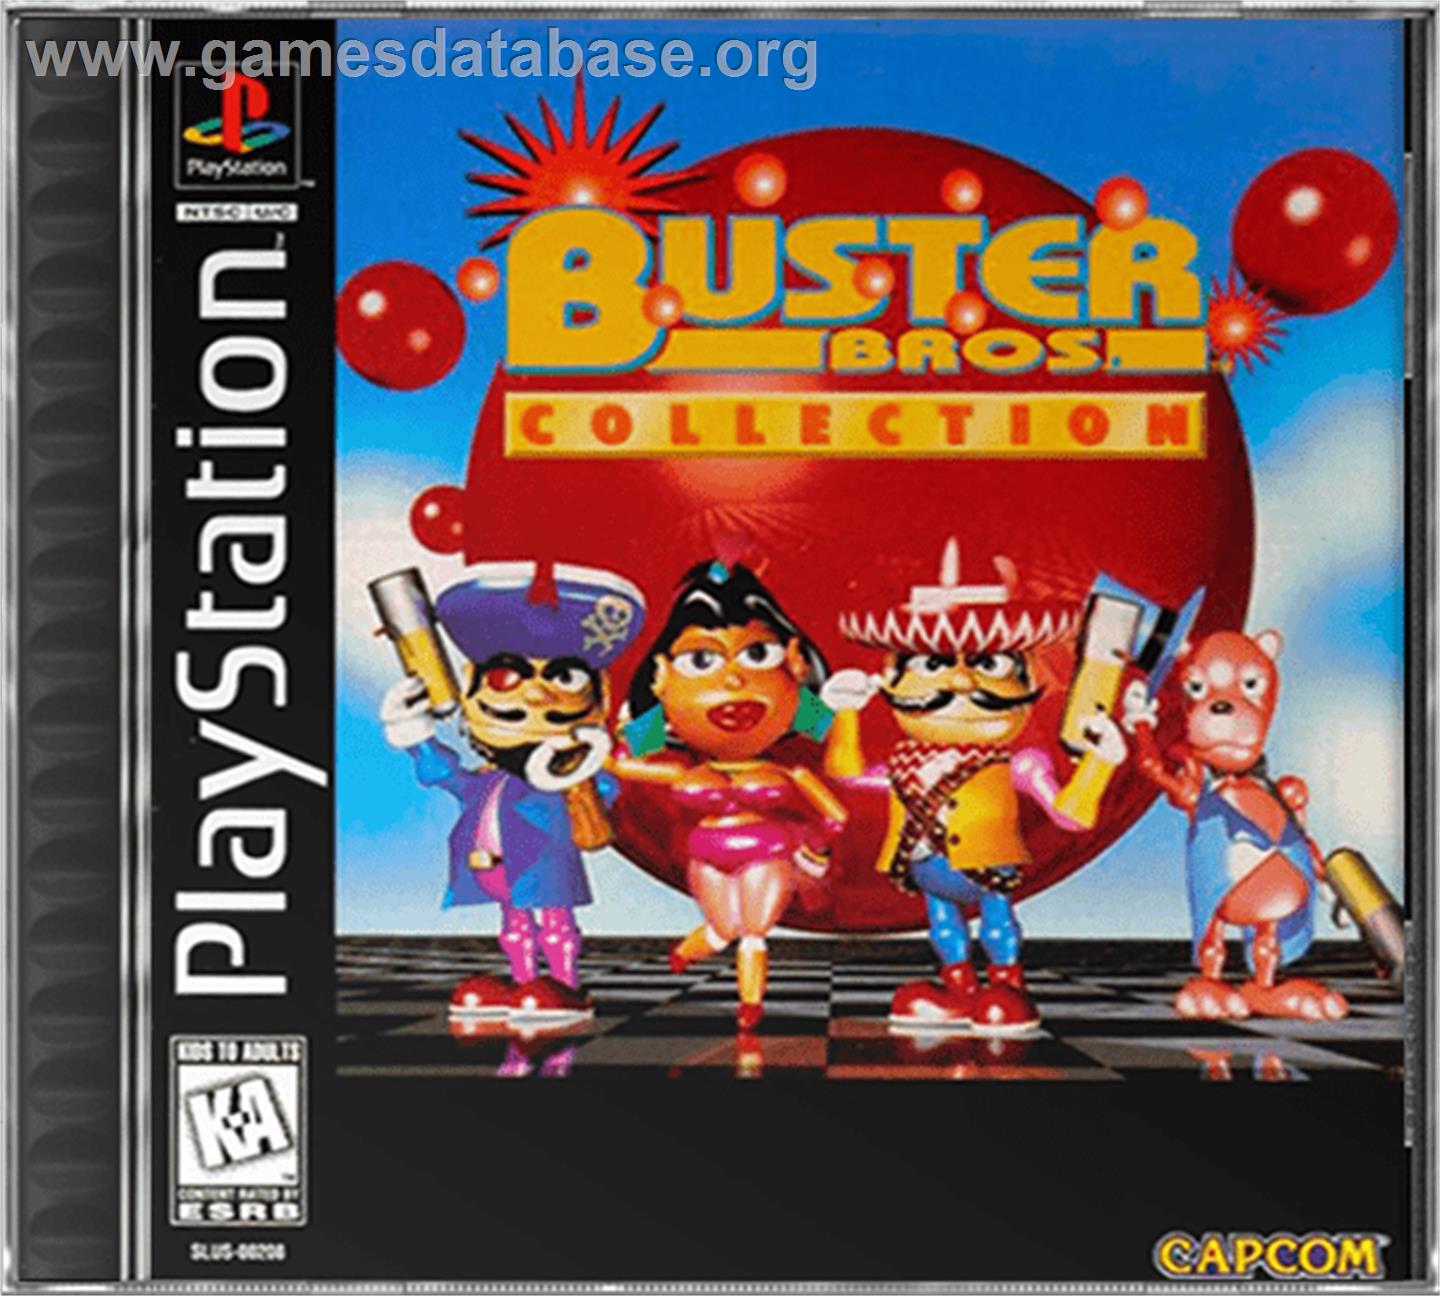 Buster Bros. Collection - Sony Playstation - Artwork - Box